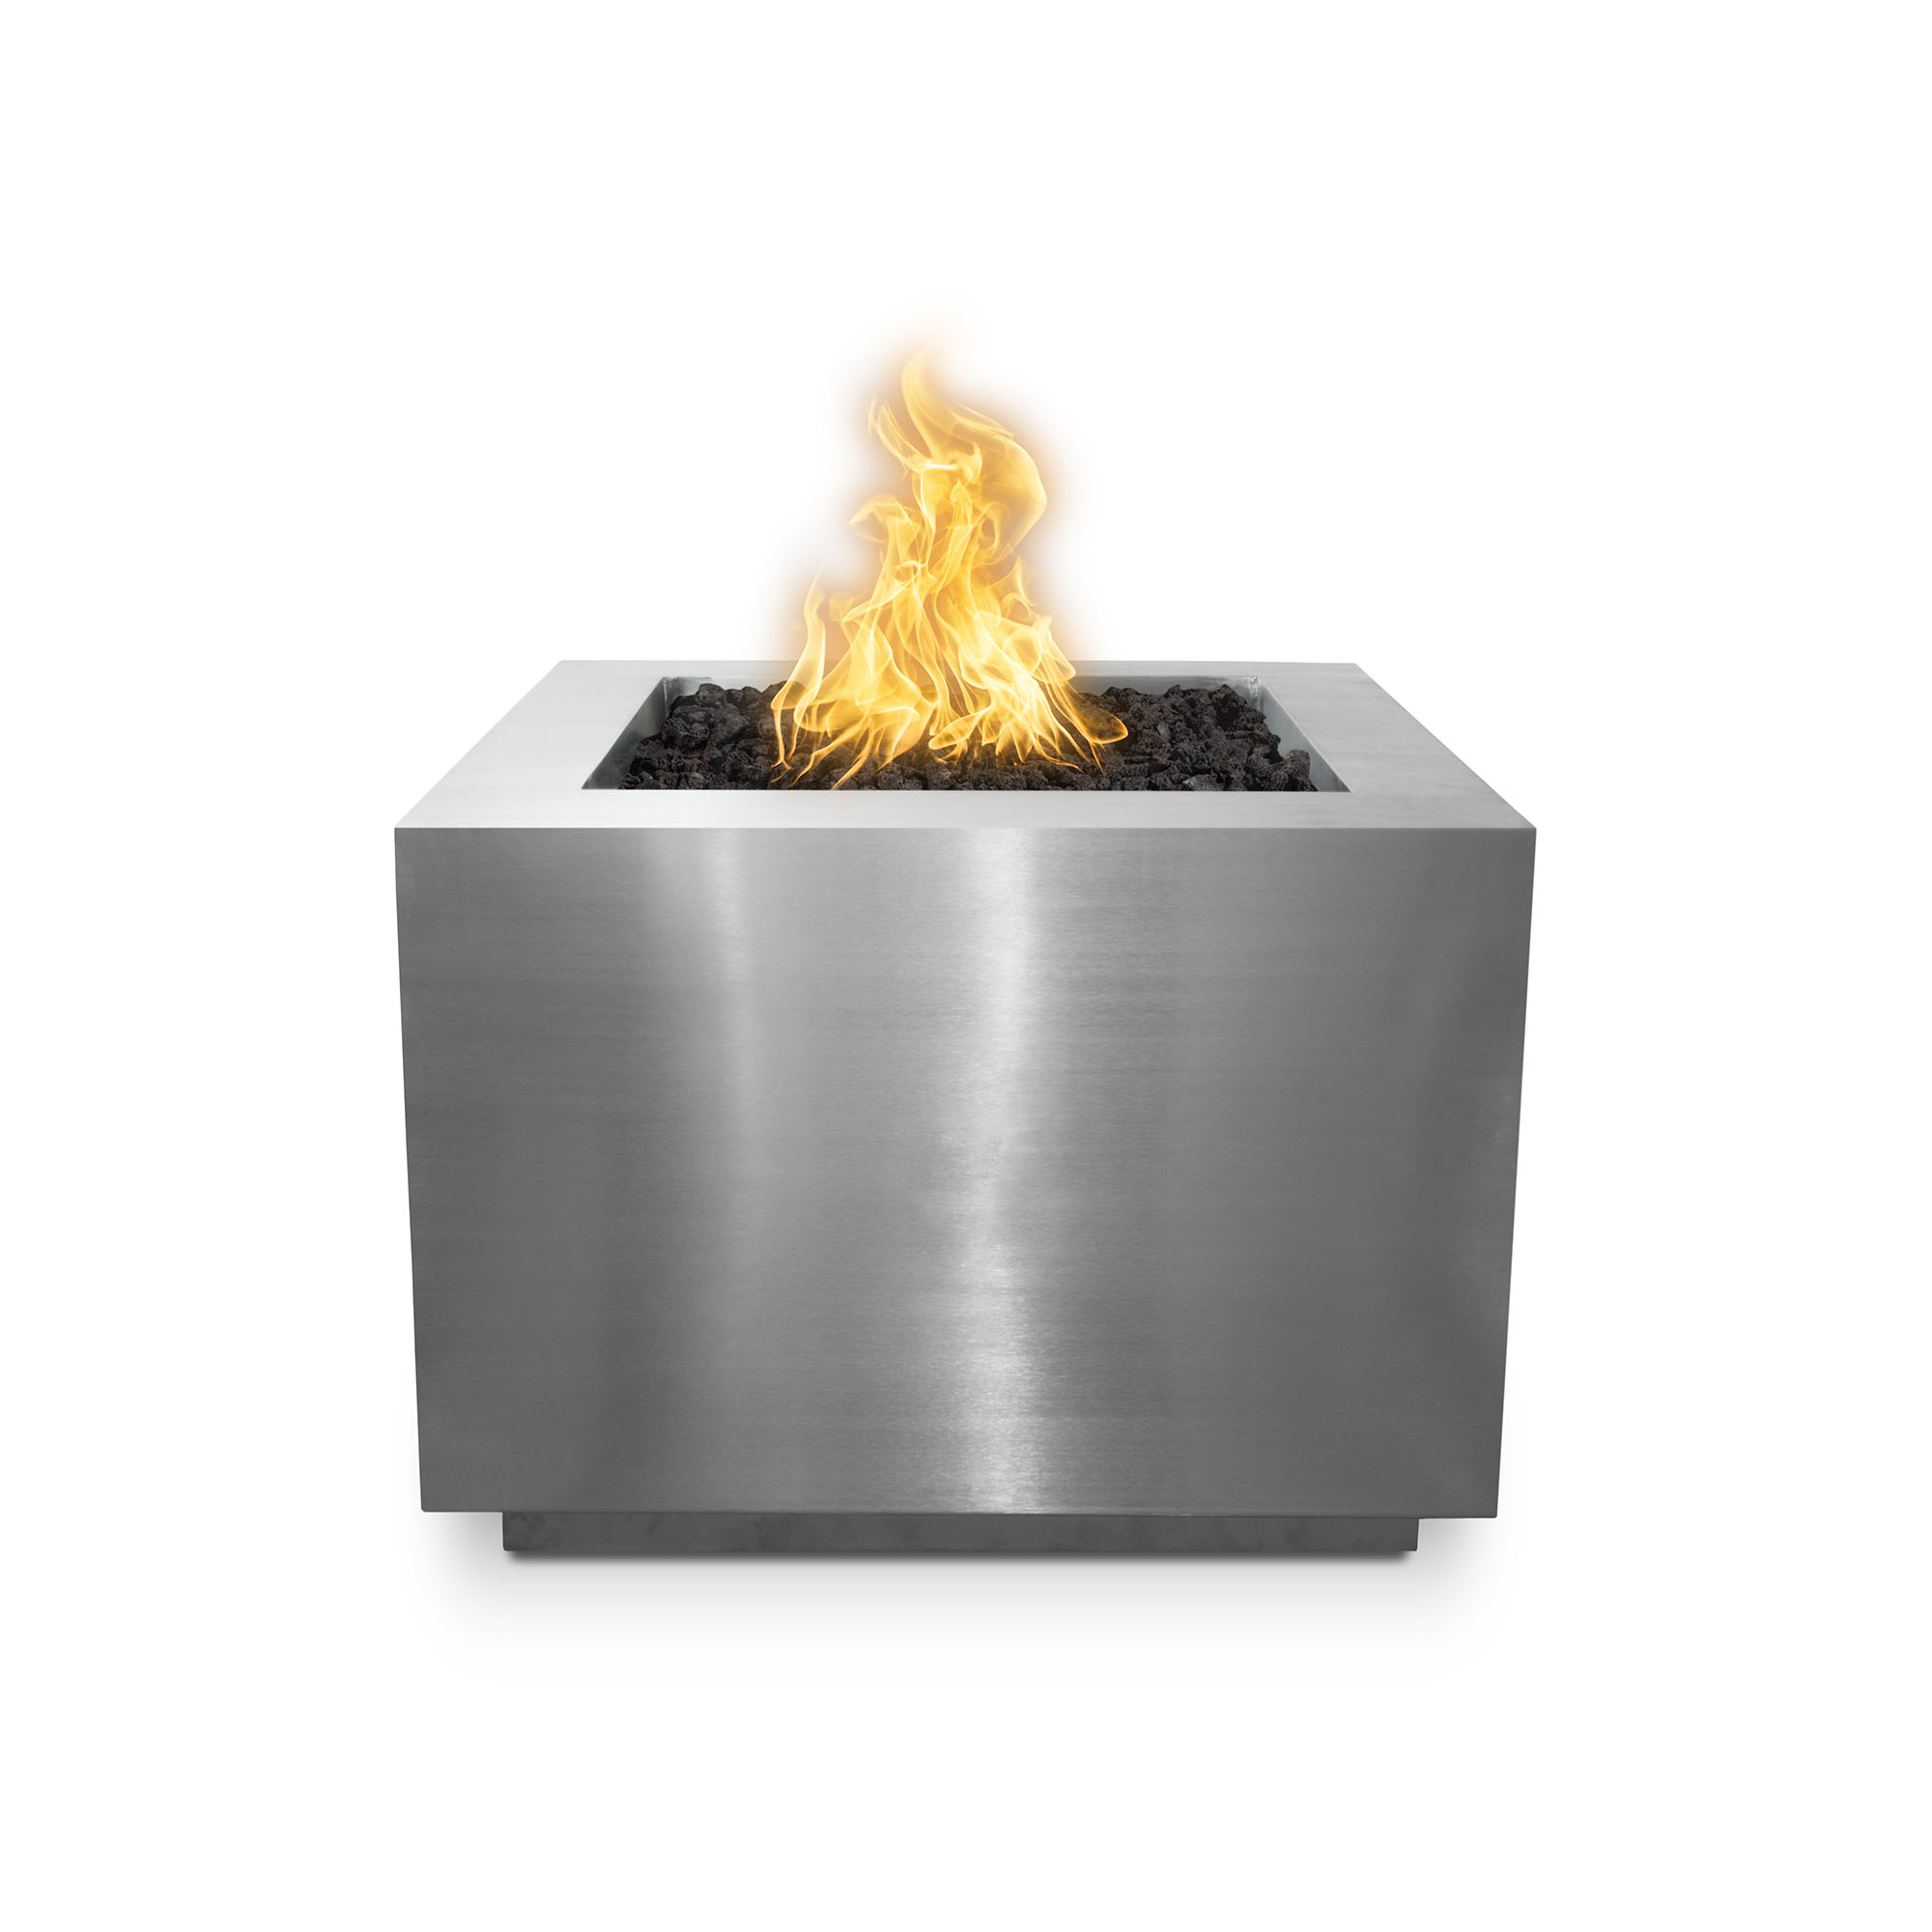 FORMA FIRE PIT – METAL COLLECTION